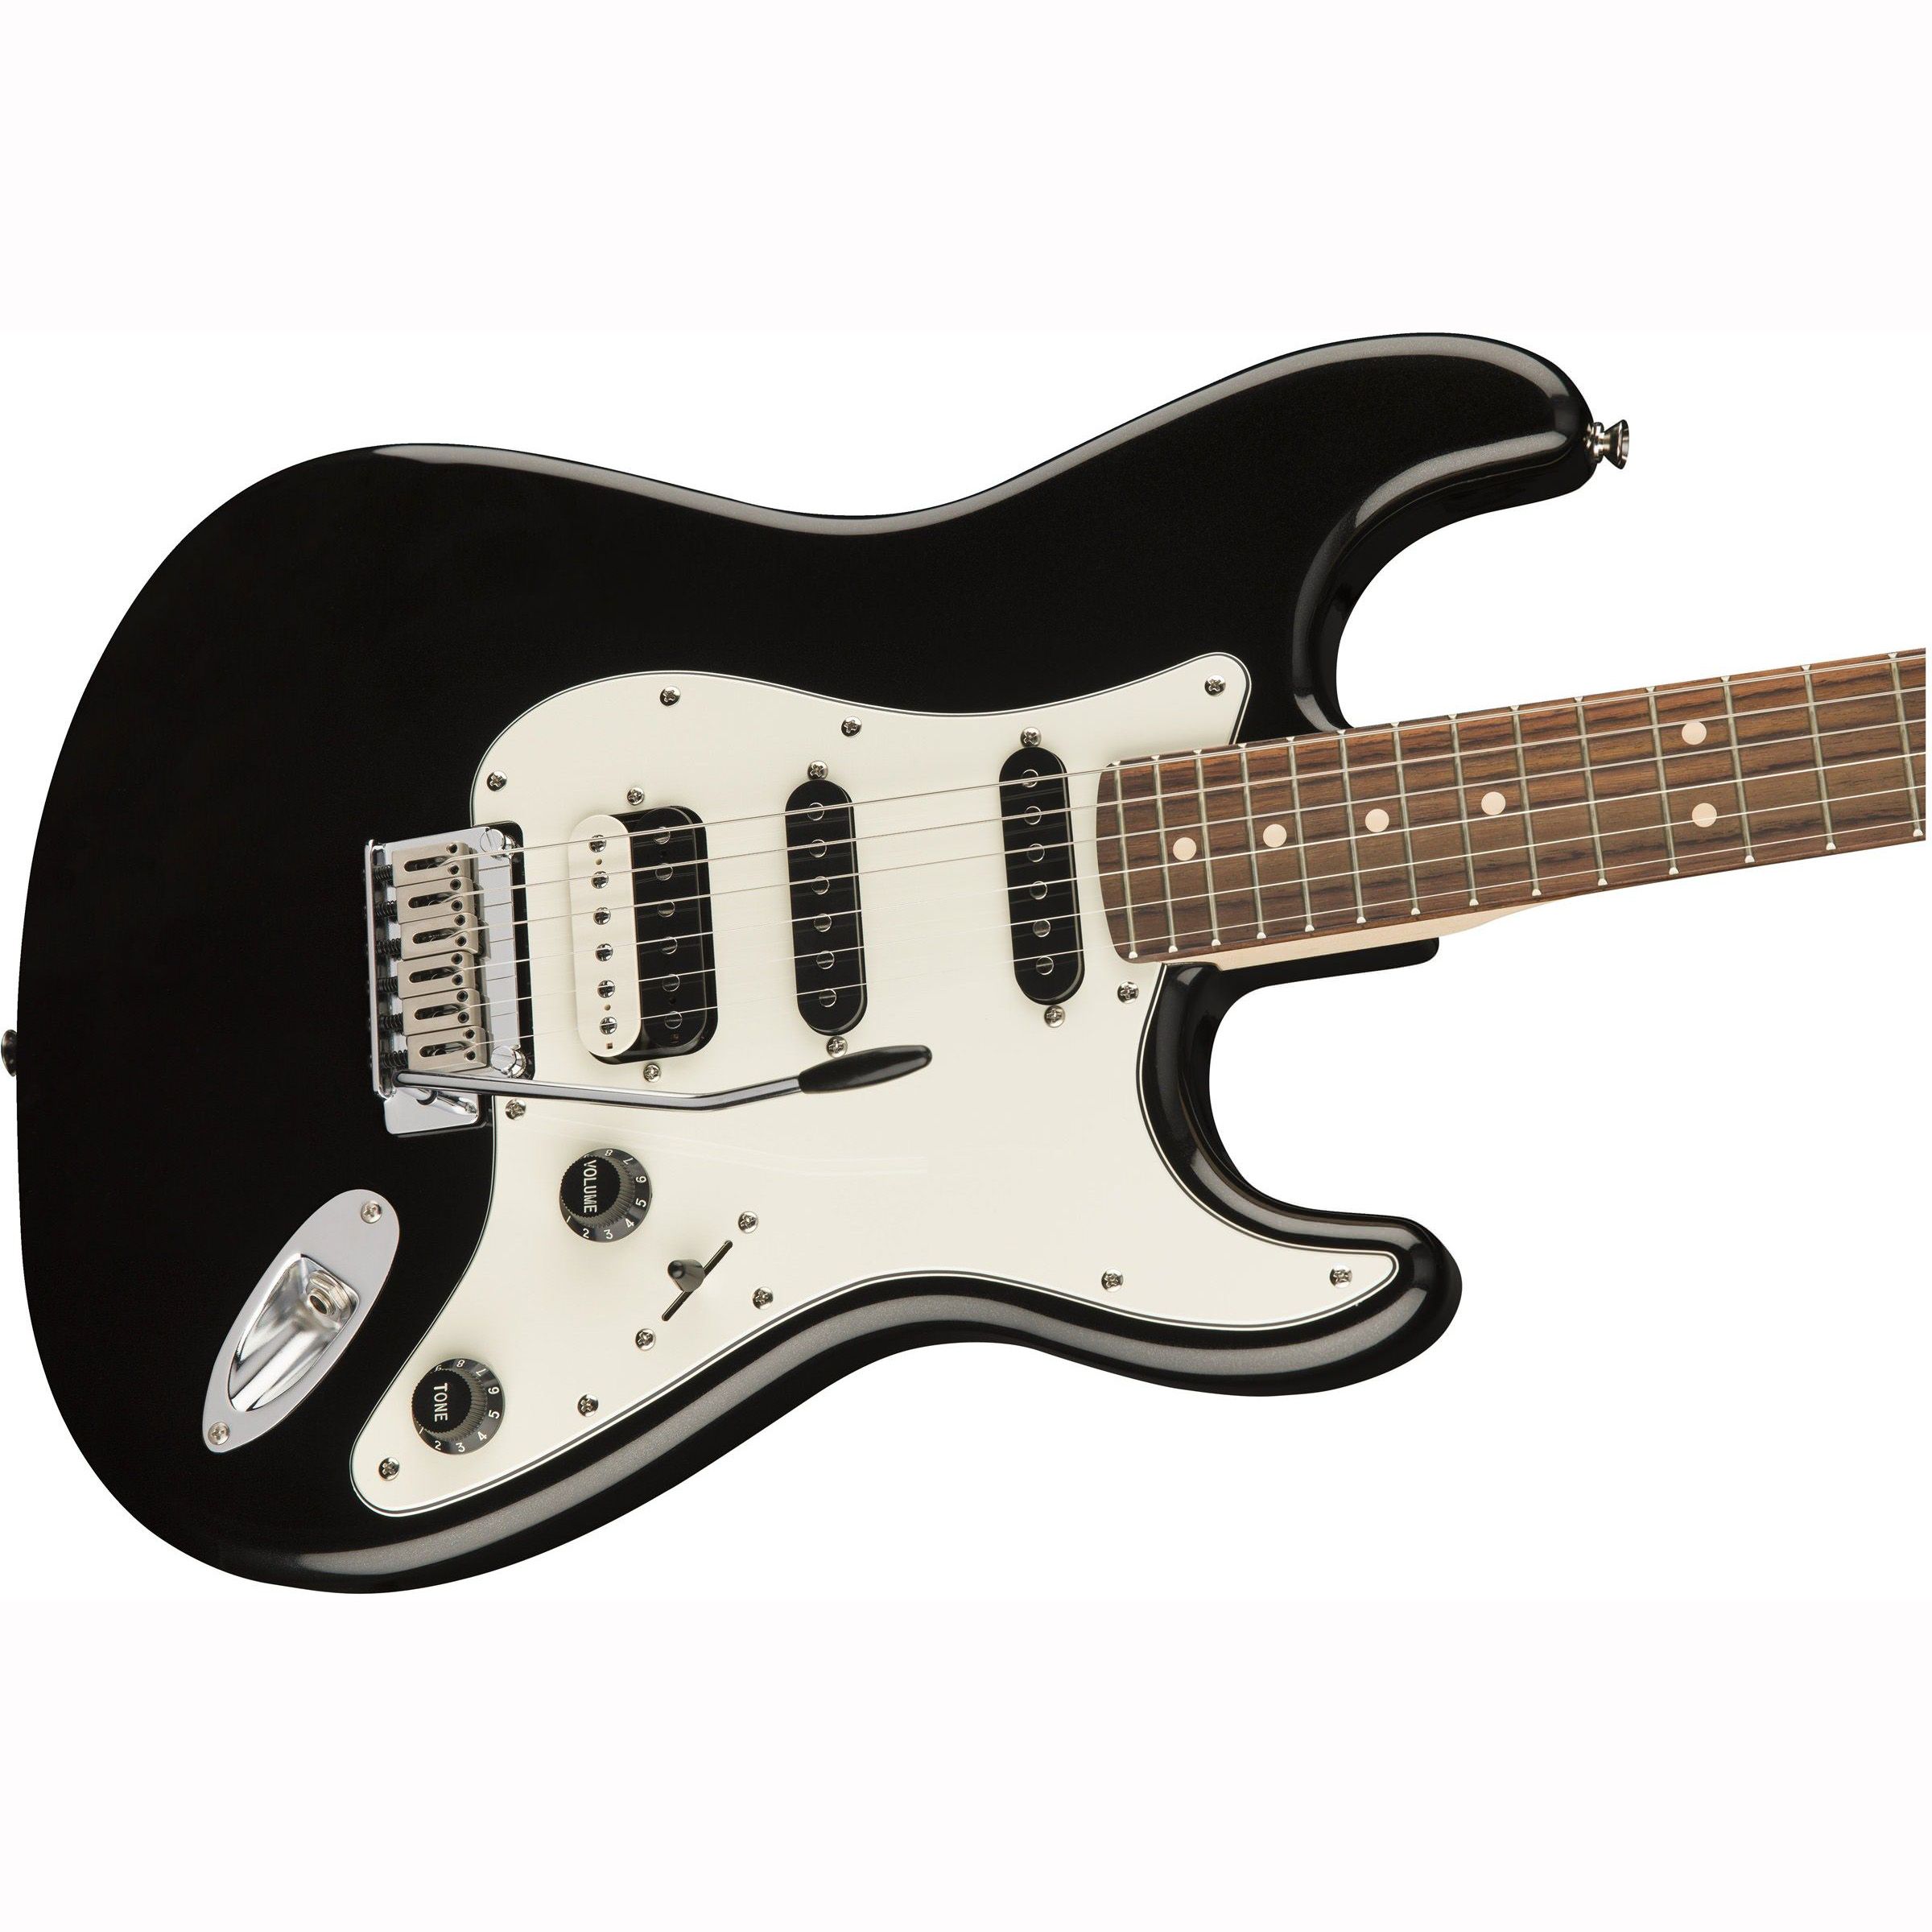 Bullet stratocaster hss. Электрогитара Fender American professional Stratocaster. Электрогитара Fender American Elite Stratocaster. Электрогитара Squier Standard Stratocaster. Электрогитара Fender Squier Stratocaster.